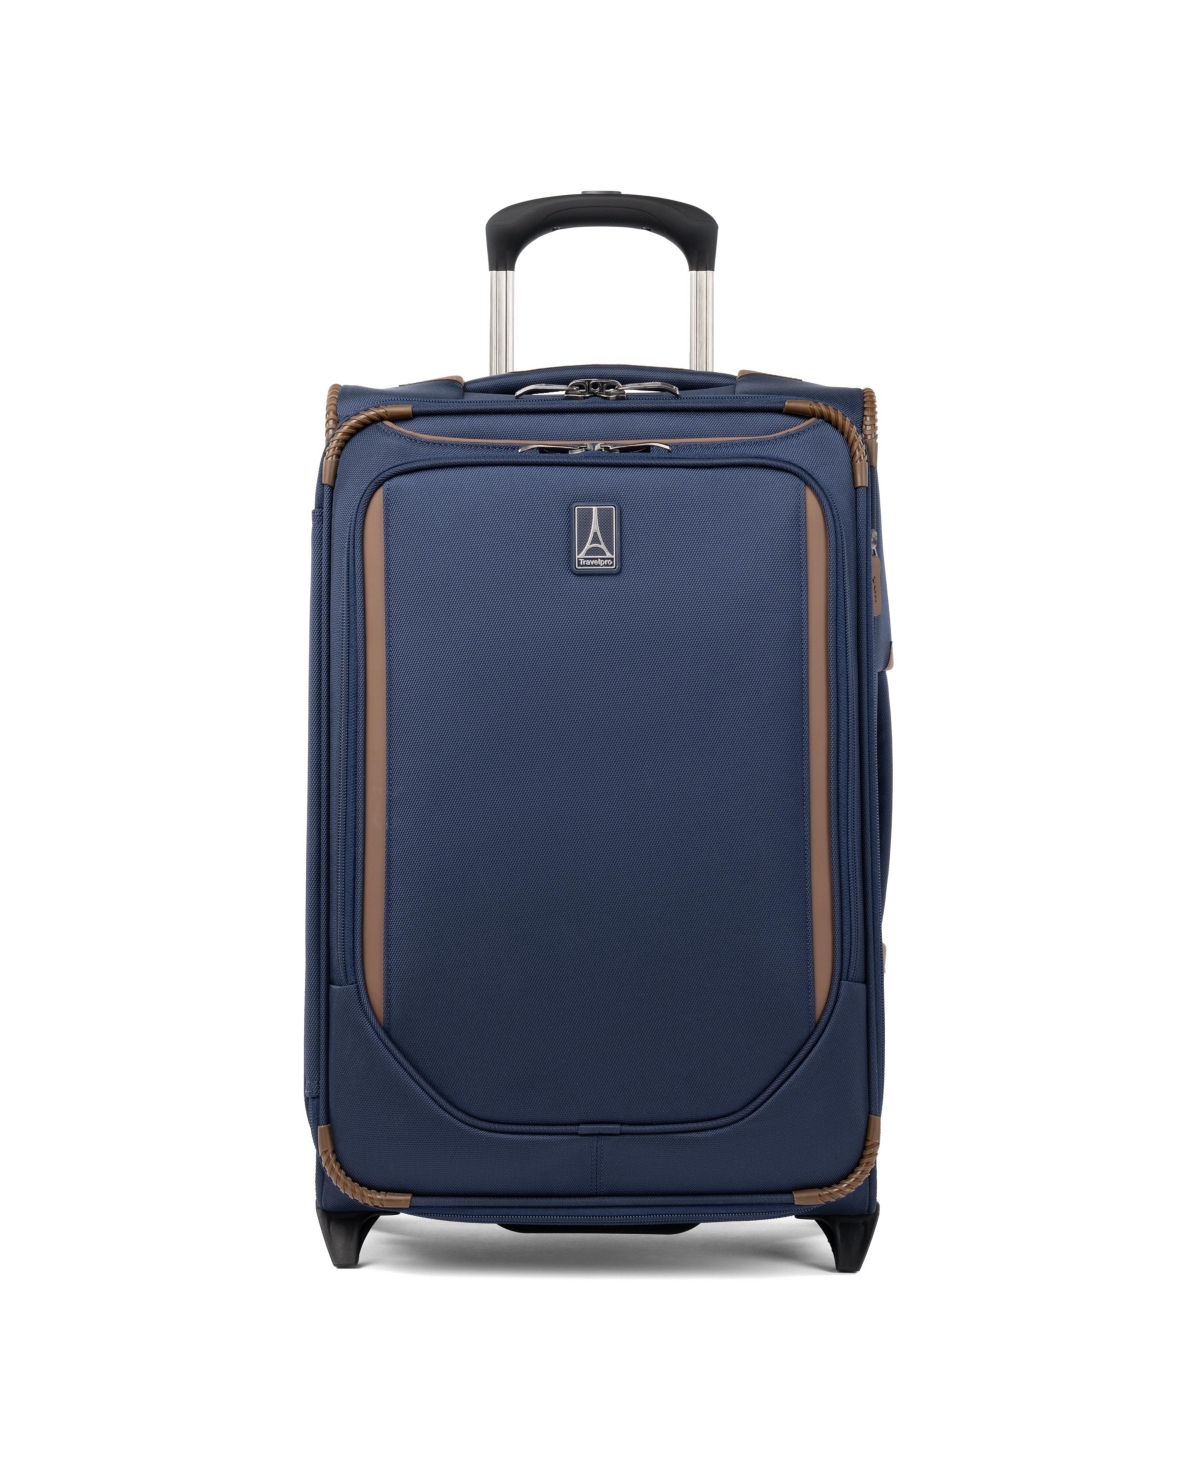 Travelpro Crew Classic Carry-on Expandable Rollaboard Luggage In Patriot Blue